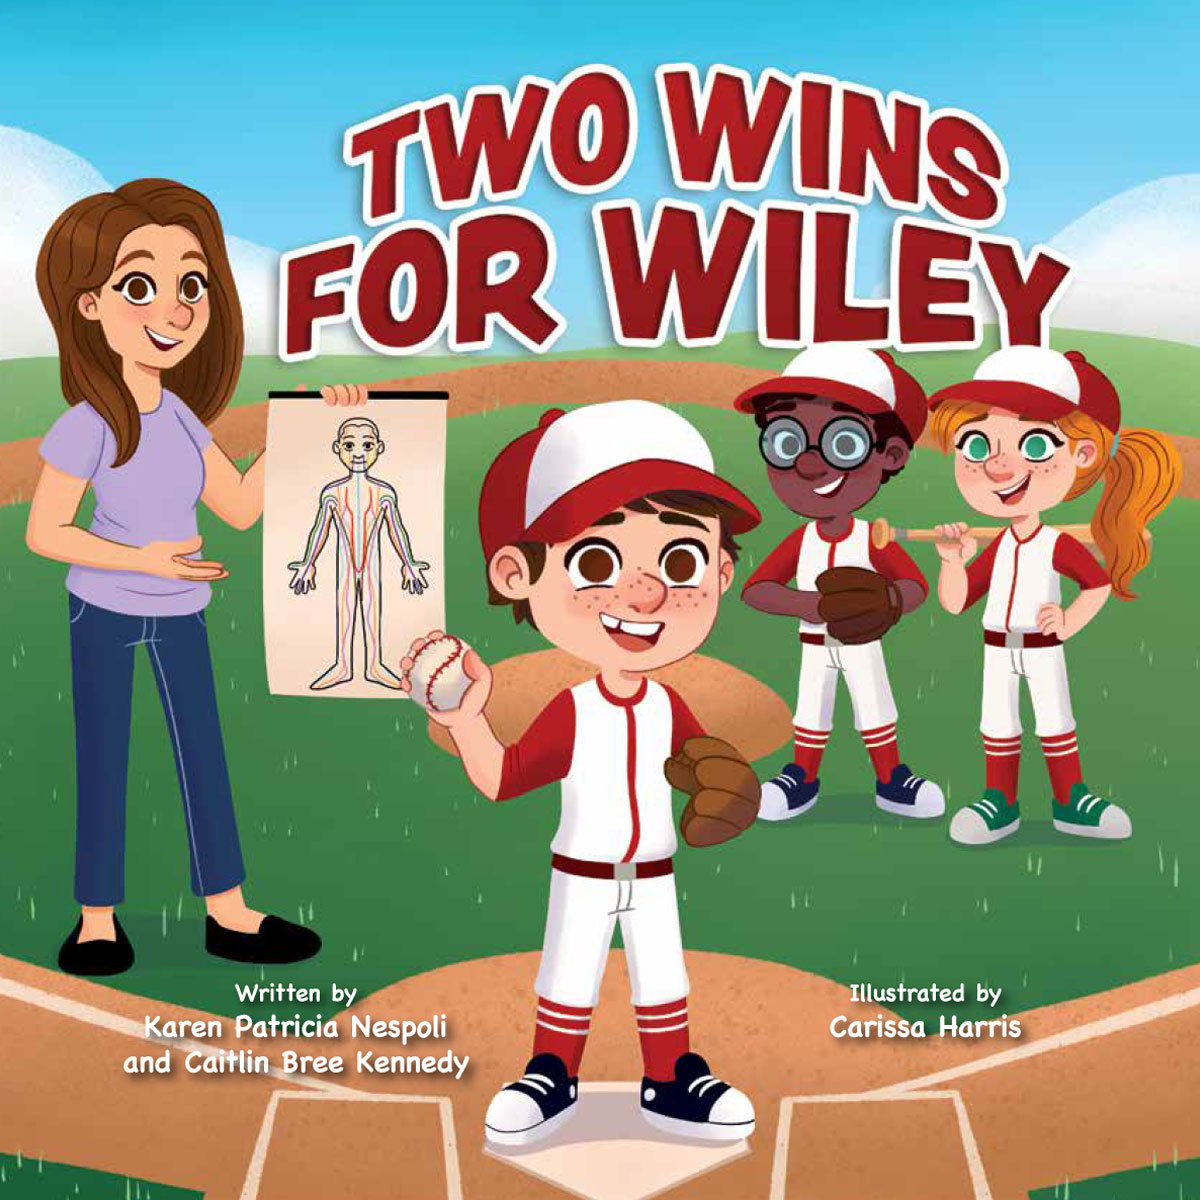 Two Wins for Wiley Book Cover by Karen Patricia Nespoli and Caitlin Bree Kennedy